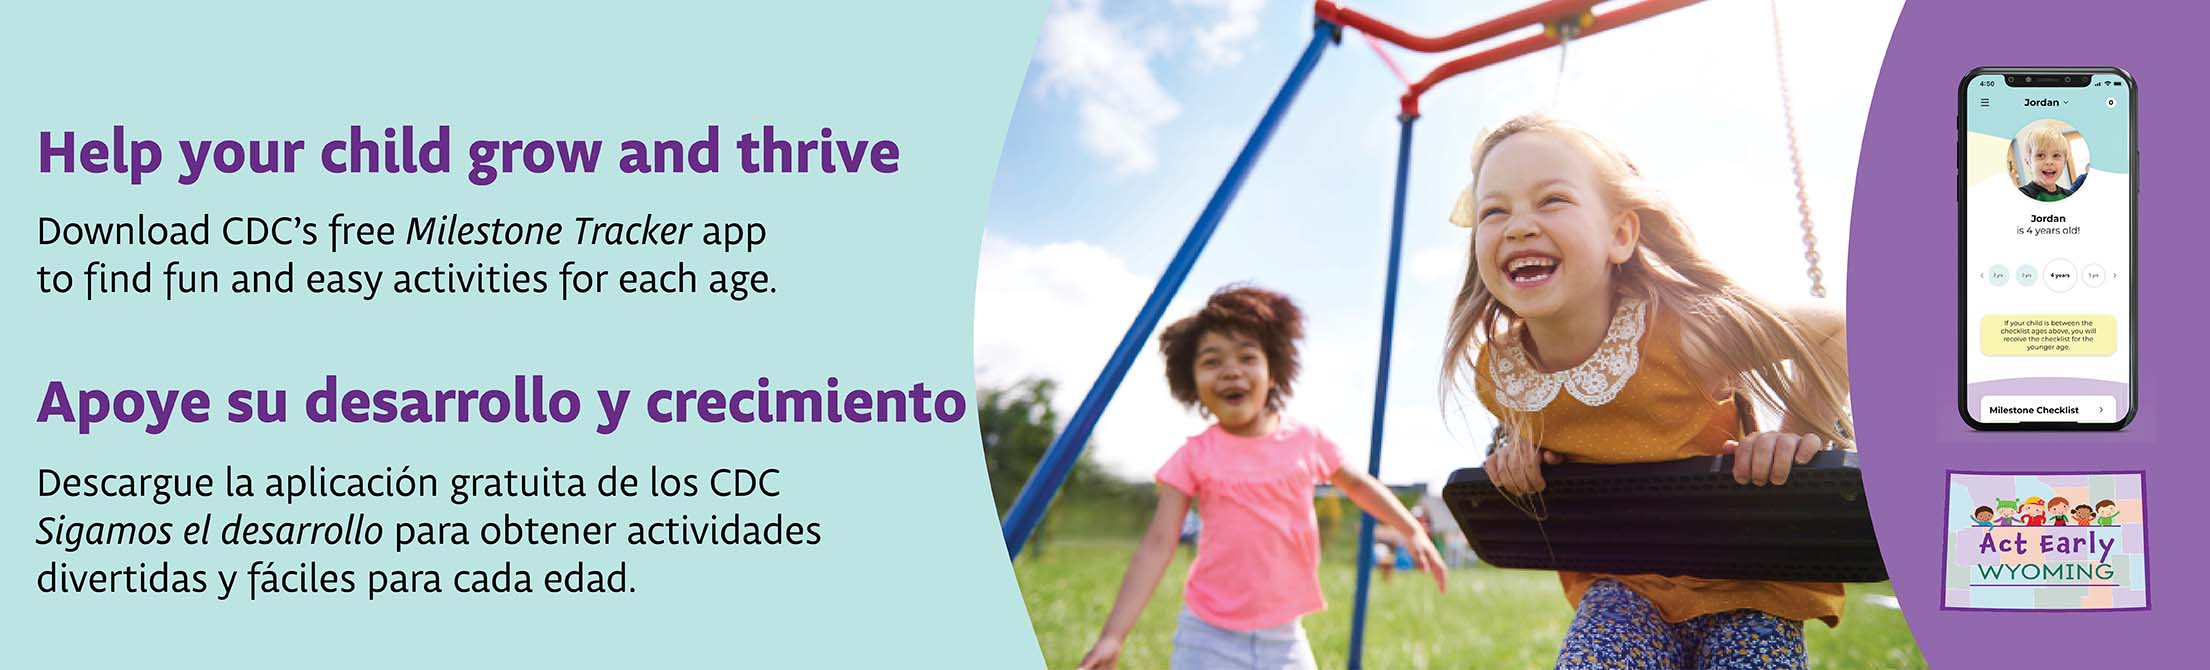 Two young girls on swings. Smartphone showing Milestones Tracker app with child. Text: Help your child grow and thrive. Download CDC's Milestone Tracker app to find fun and easy activities for each age. 